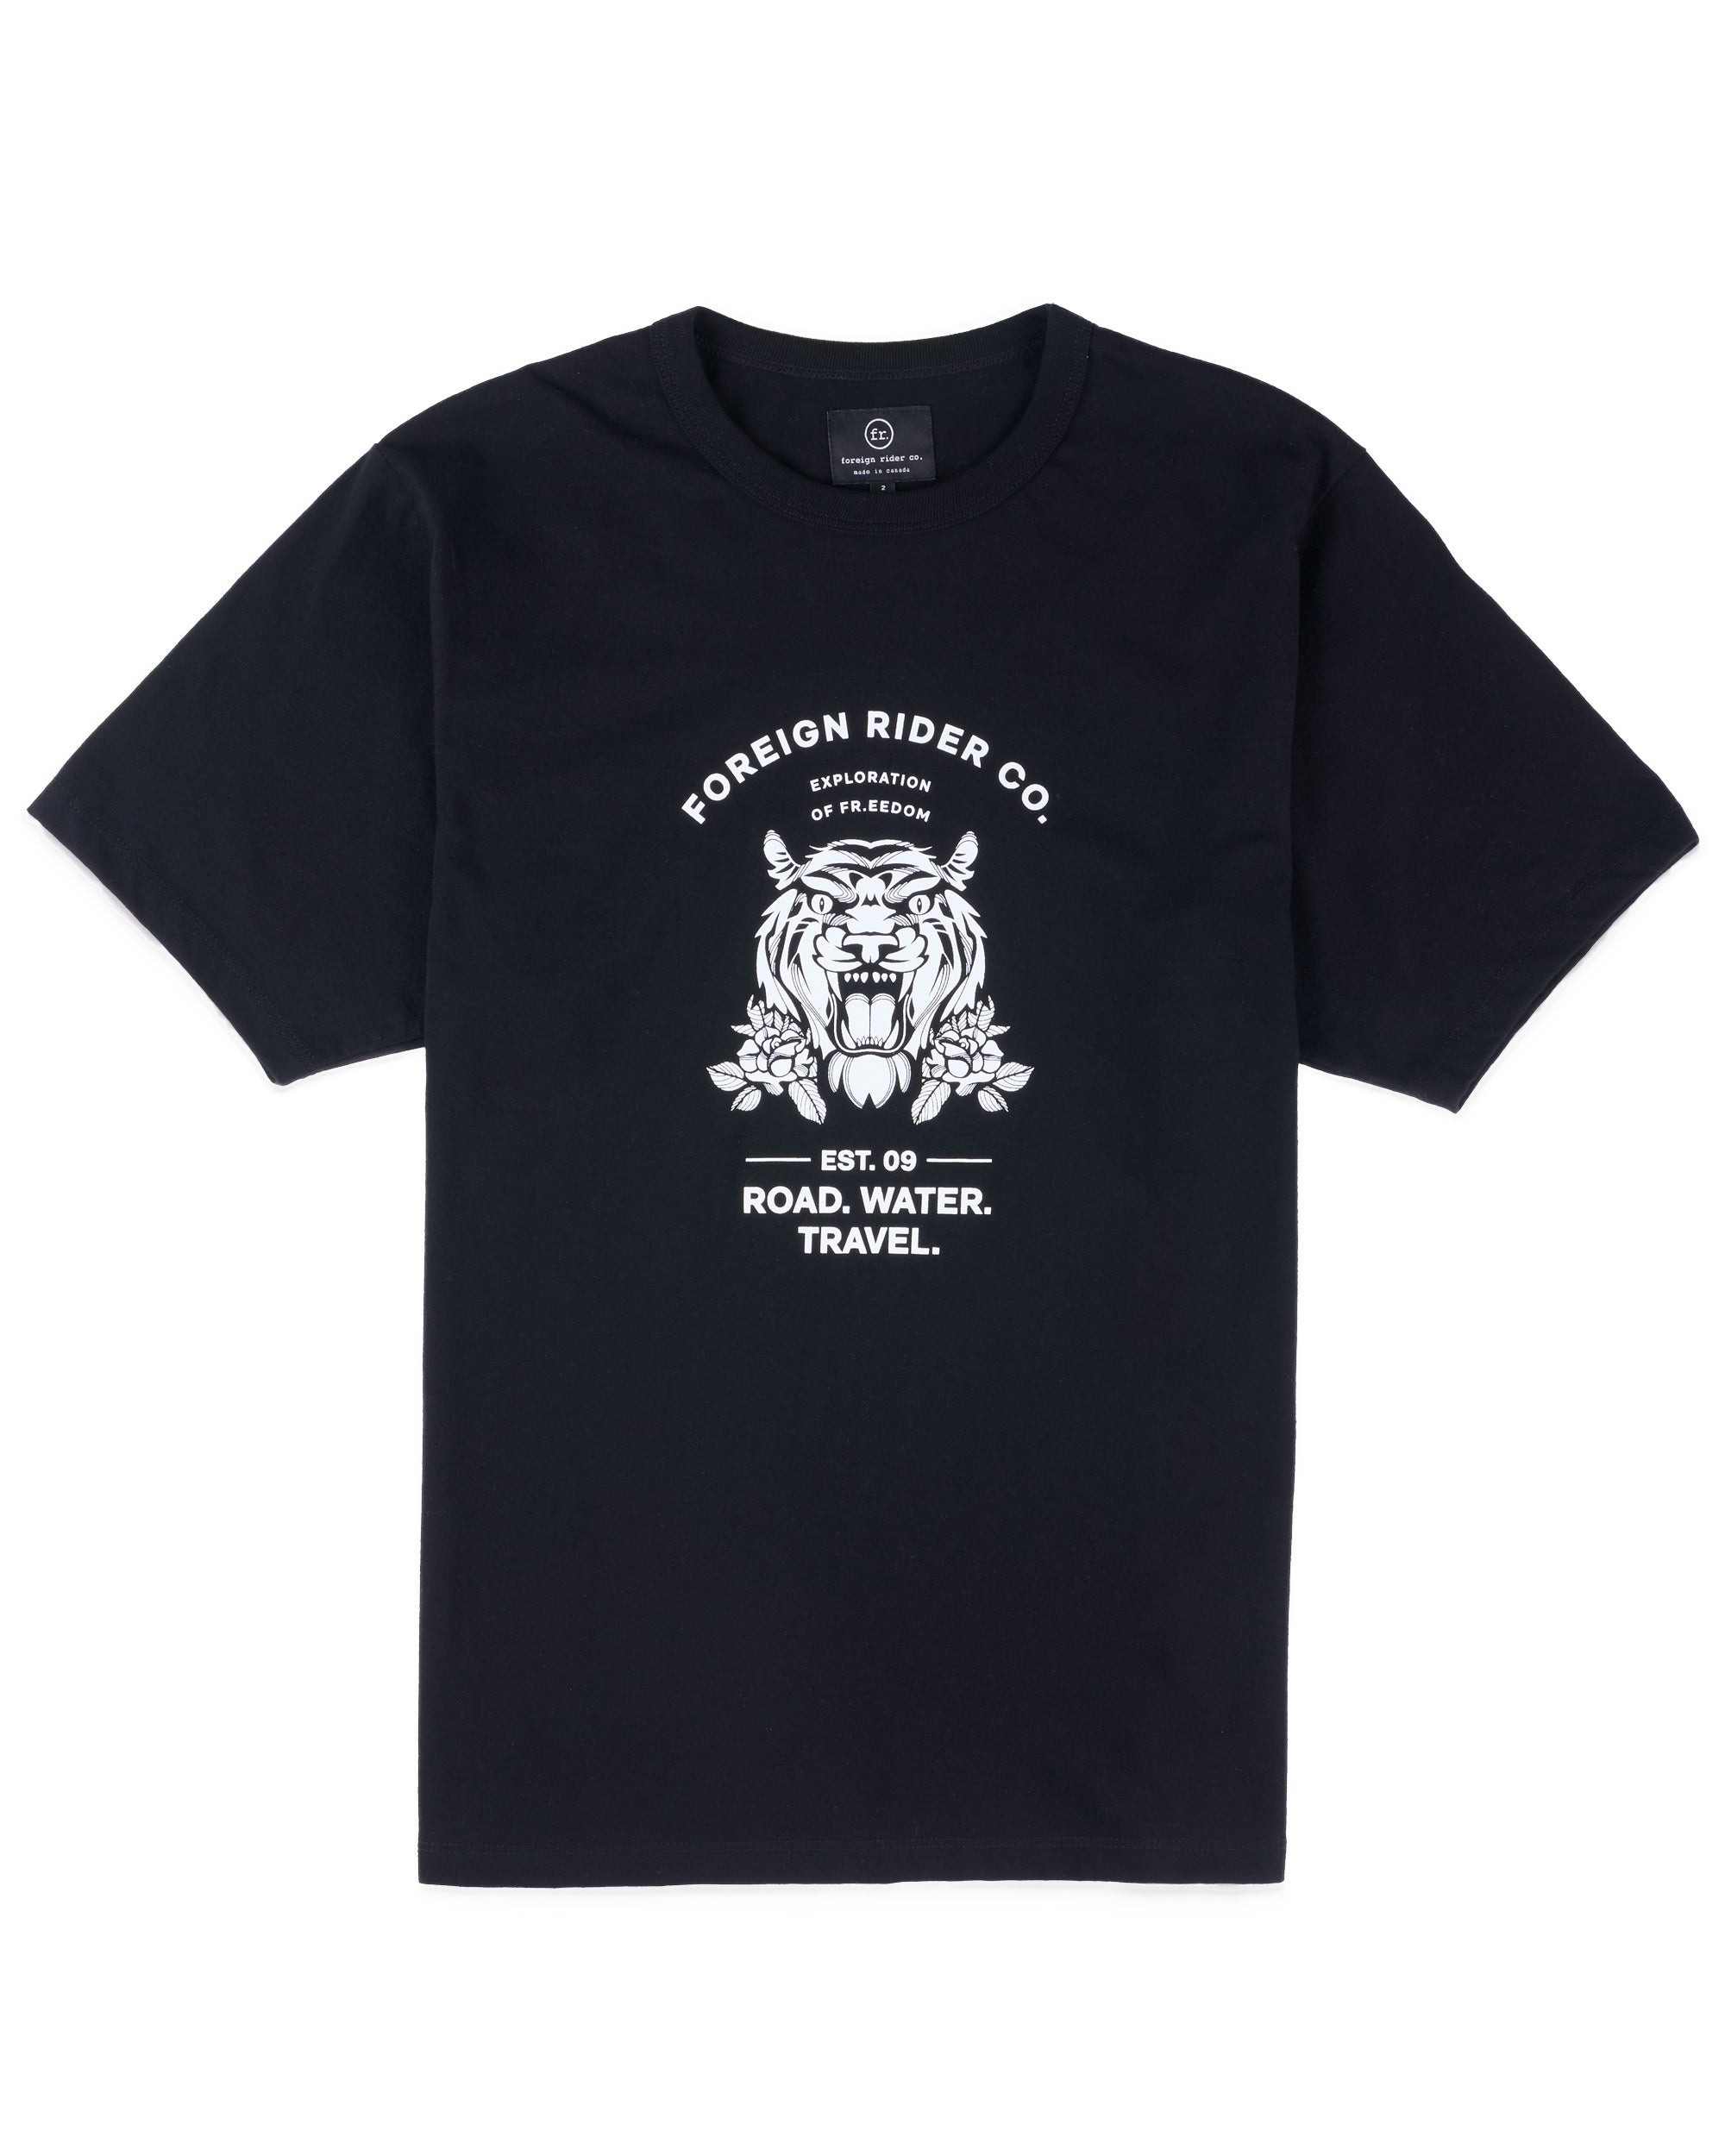 FR. Tiger Graphic T-Shirt Black - Foreign Rider Co.